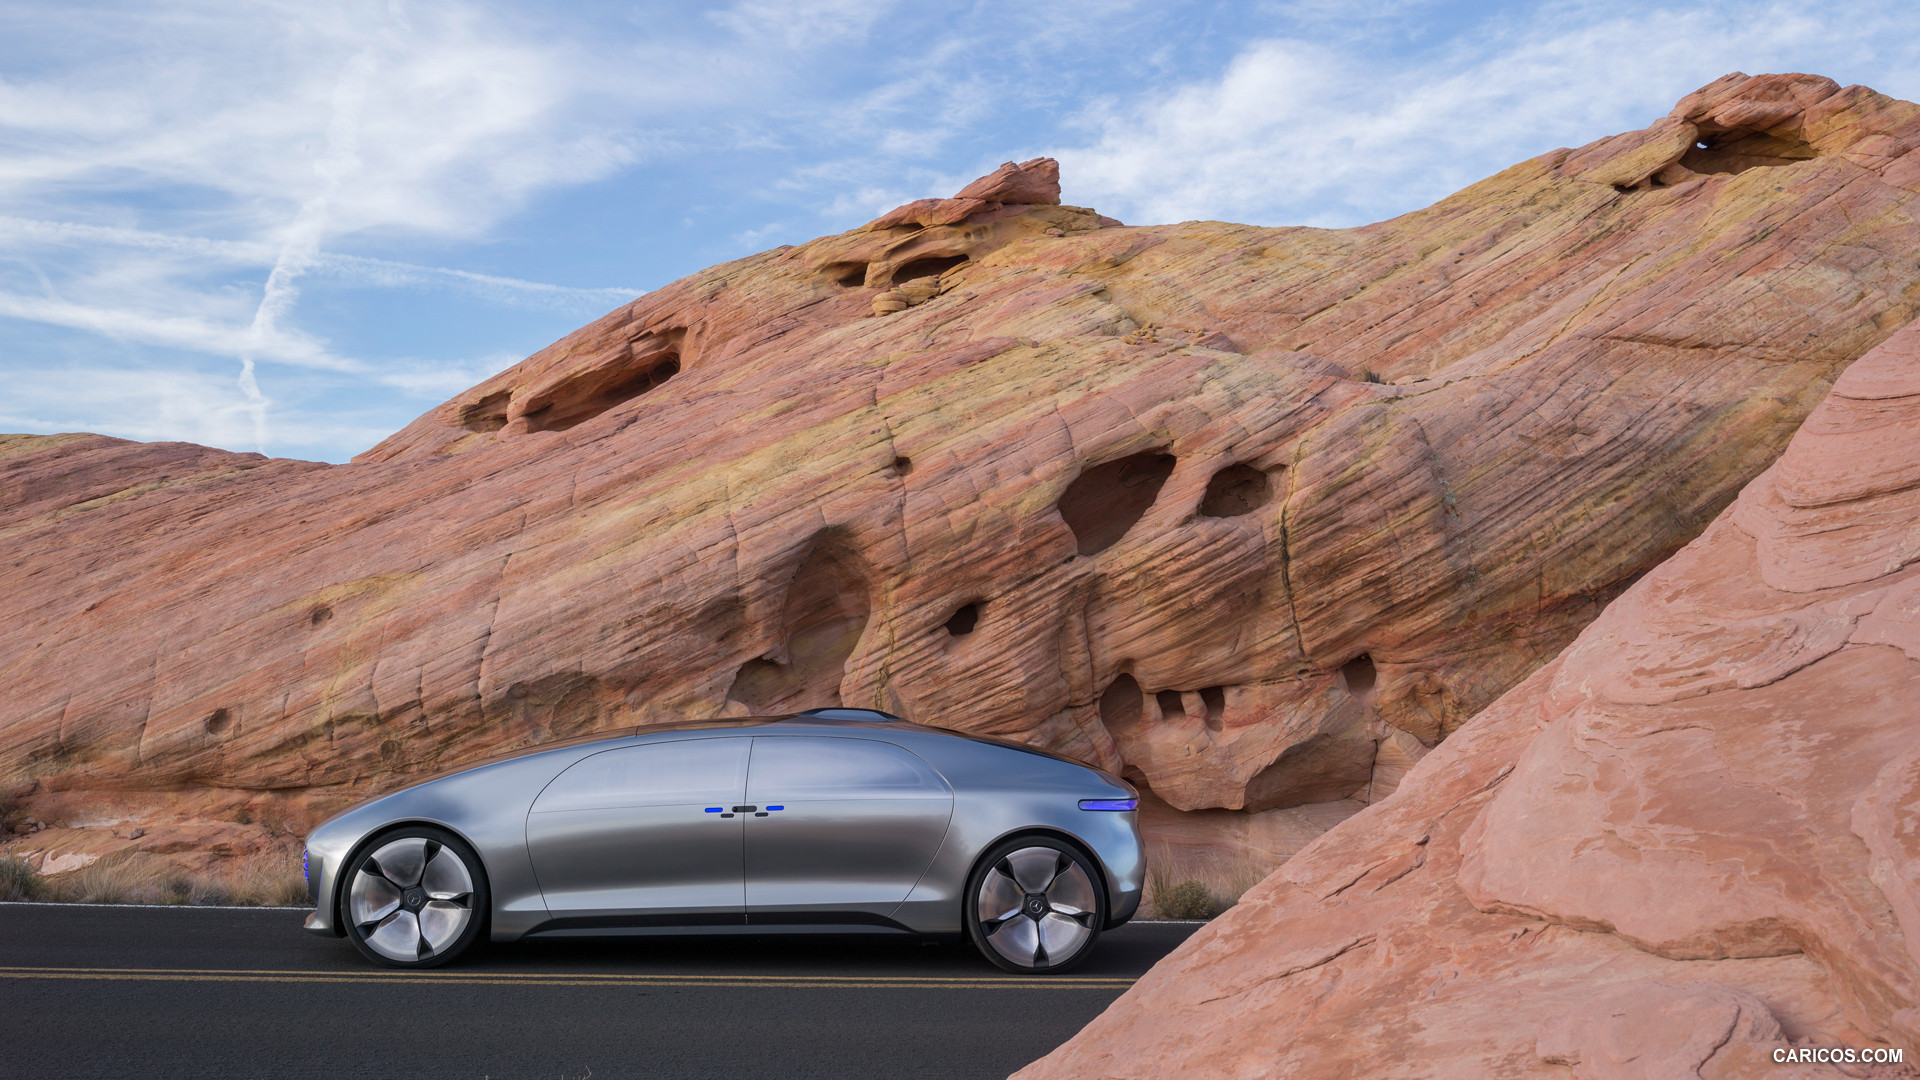 2015 Mercedes-Benz F 015 Luxury in Motion Concept  - Side, #16 of 92